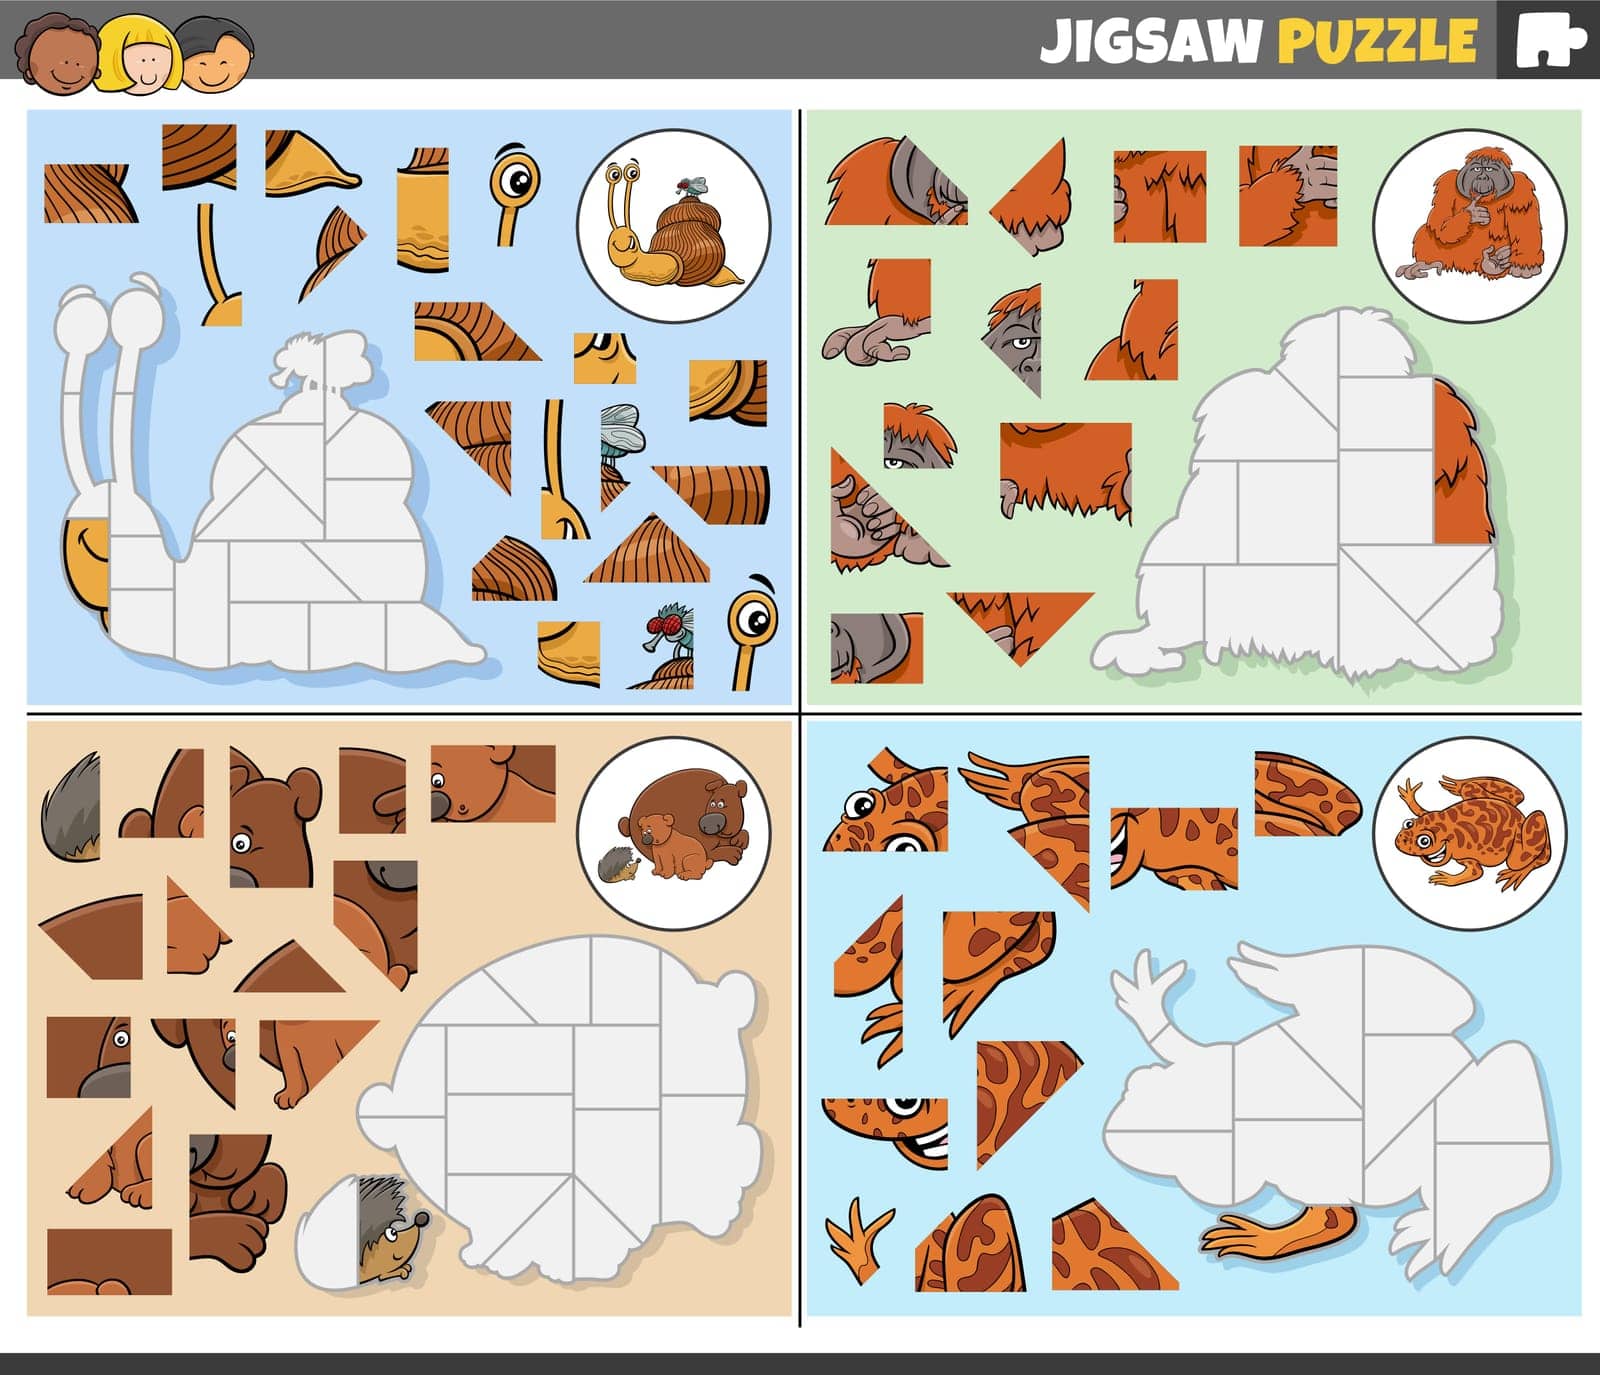 Cartoon illustration of educational jigsaw puzzle games set with animal characters